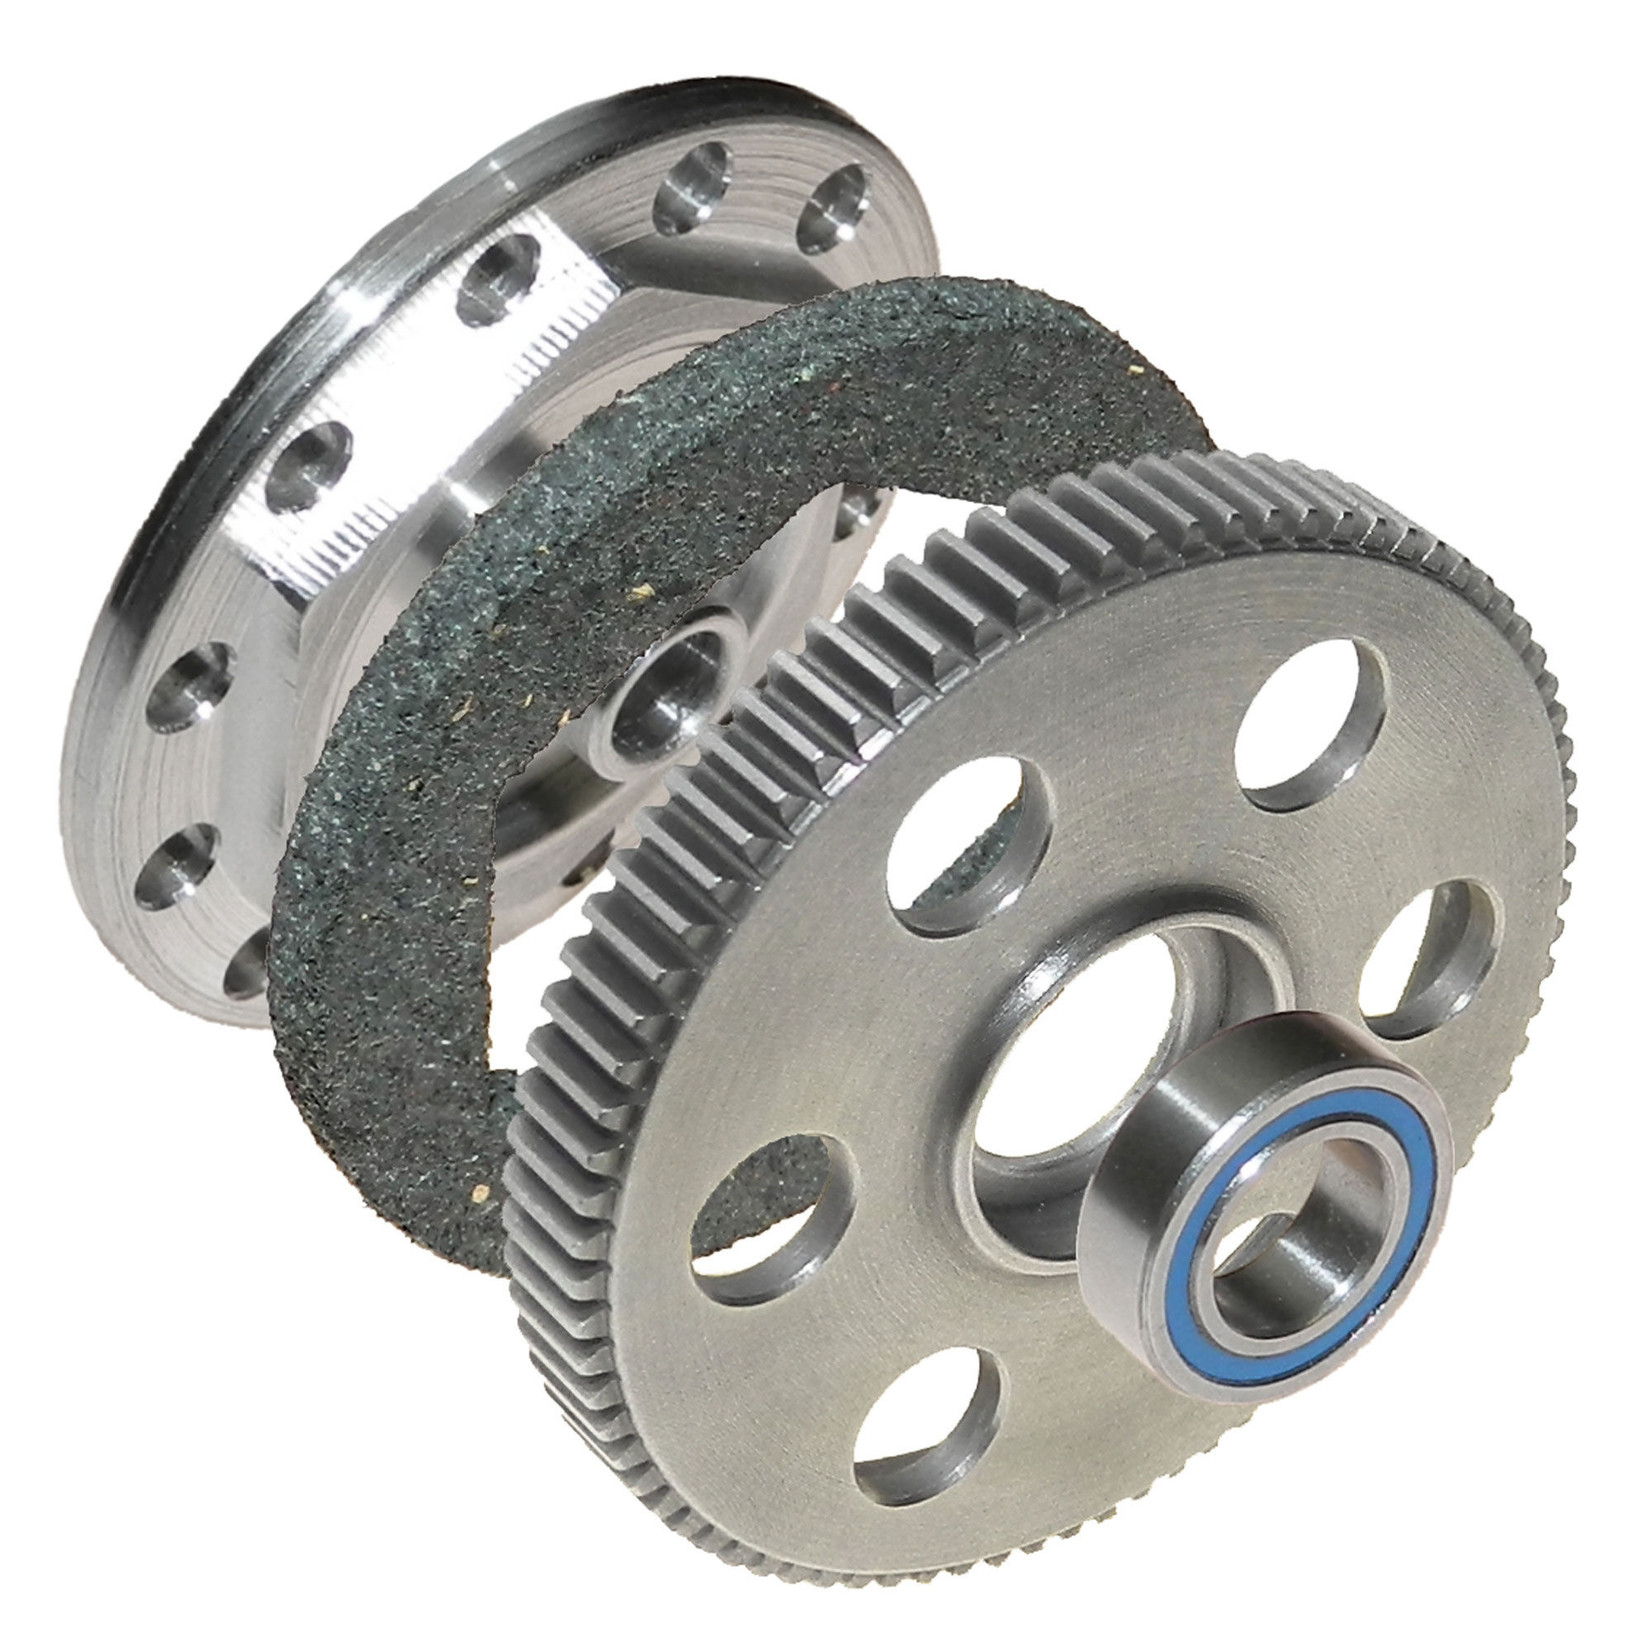 Robinson Racing Products (RRP) Slipper Unit 80T Steel Spur Gear: Wraith